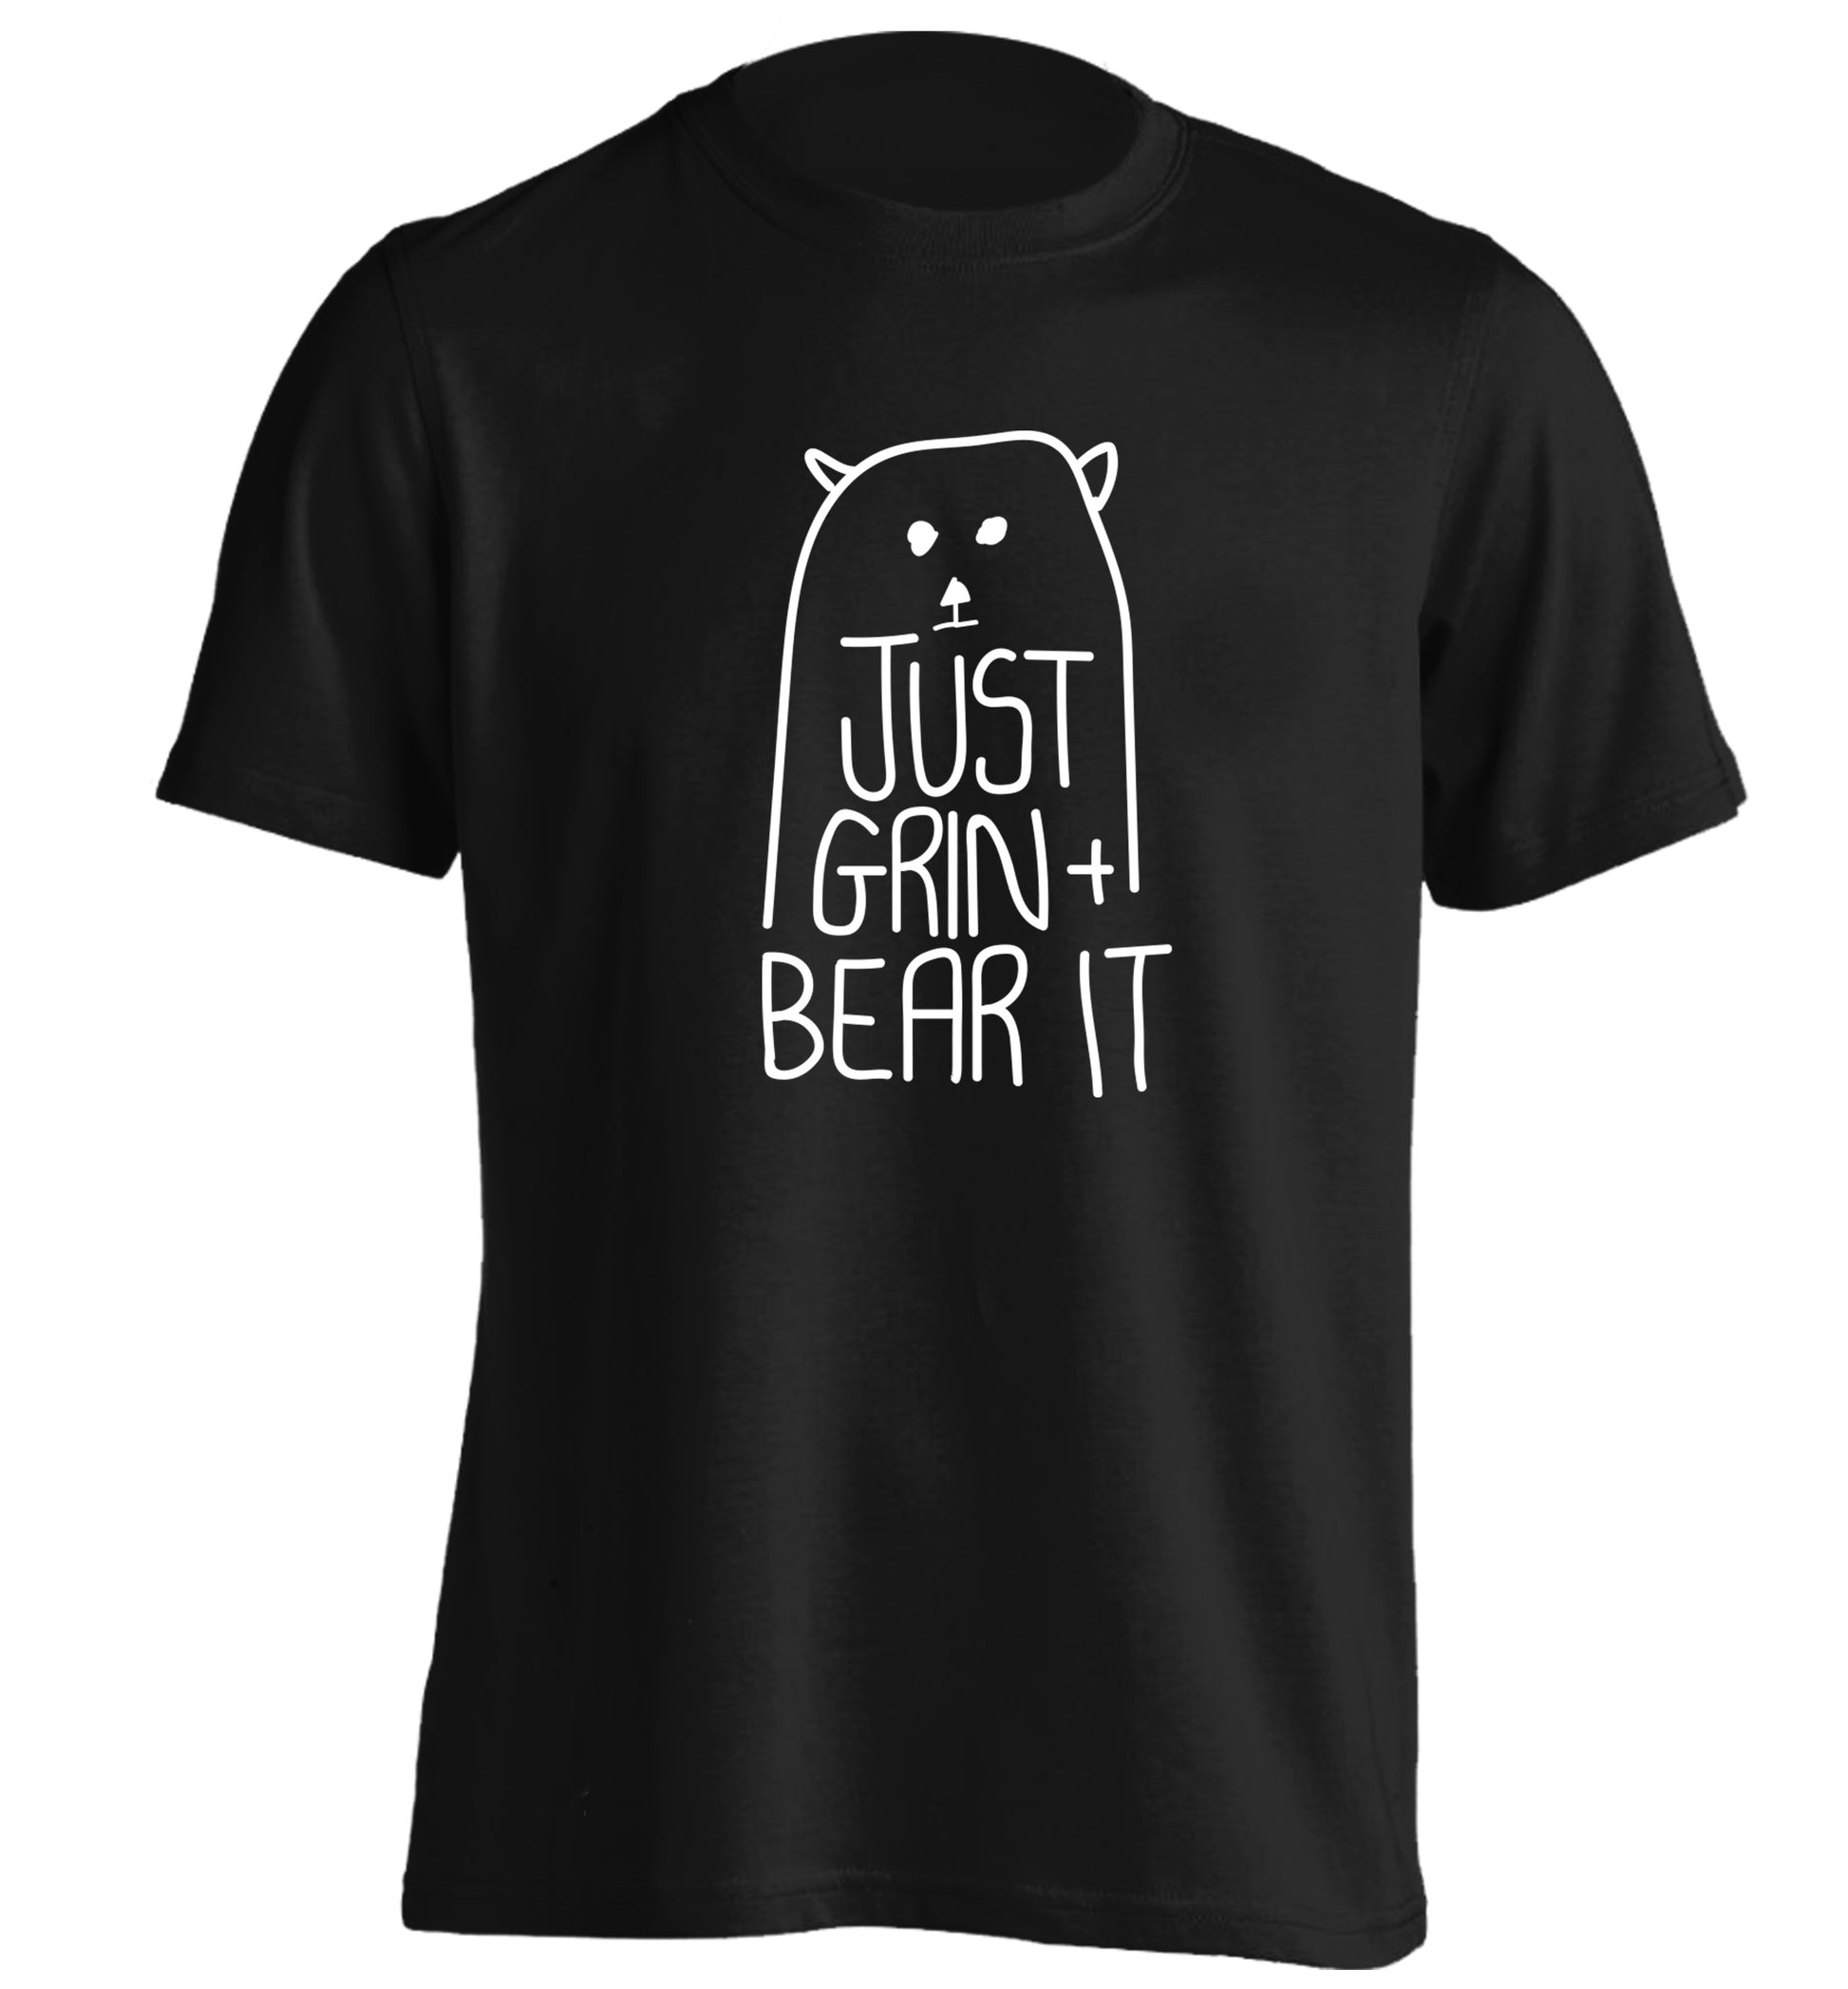 Just grin and bear it adults unisex black Tshirt 2XL